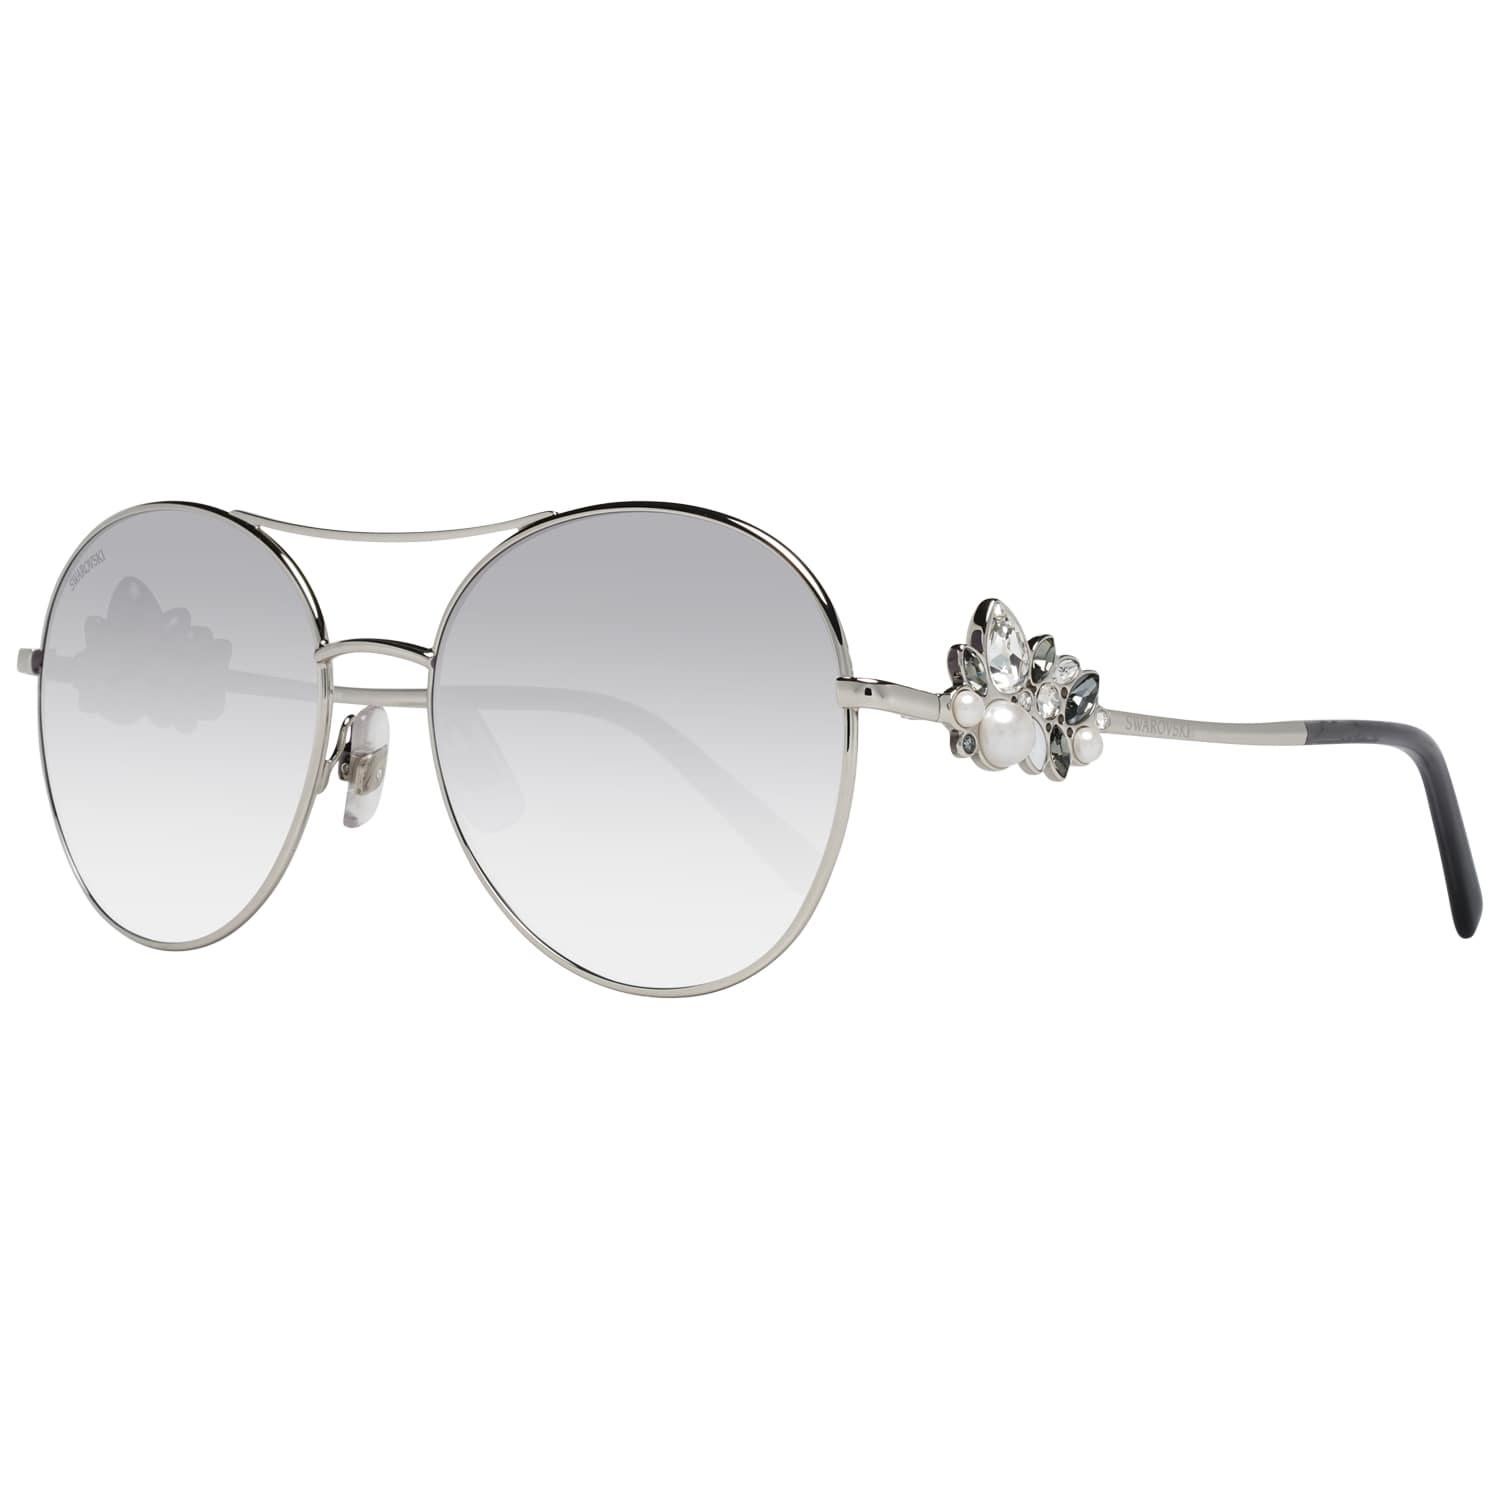 DetailsMATERIAL: MetalCOLOR: SilverMODEL: SK0278 5516BGENDER: WomenCOUNTRY OF MANUFACTURE: ChinaTYPE: SunglassesORIGINAL CASE?: YesSTYLE: AviatorOCCASION: CasualFEATURES: LightweightLENS COLOR: GreyLENS TECHNOLOGY: GradientYEAR MANUFACTURED: